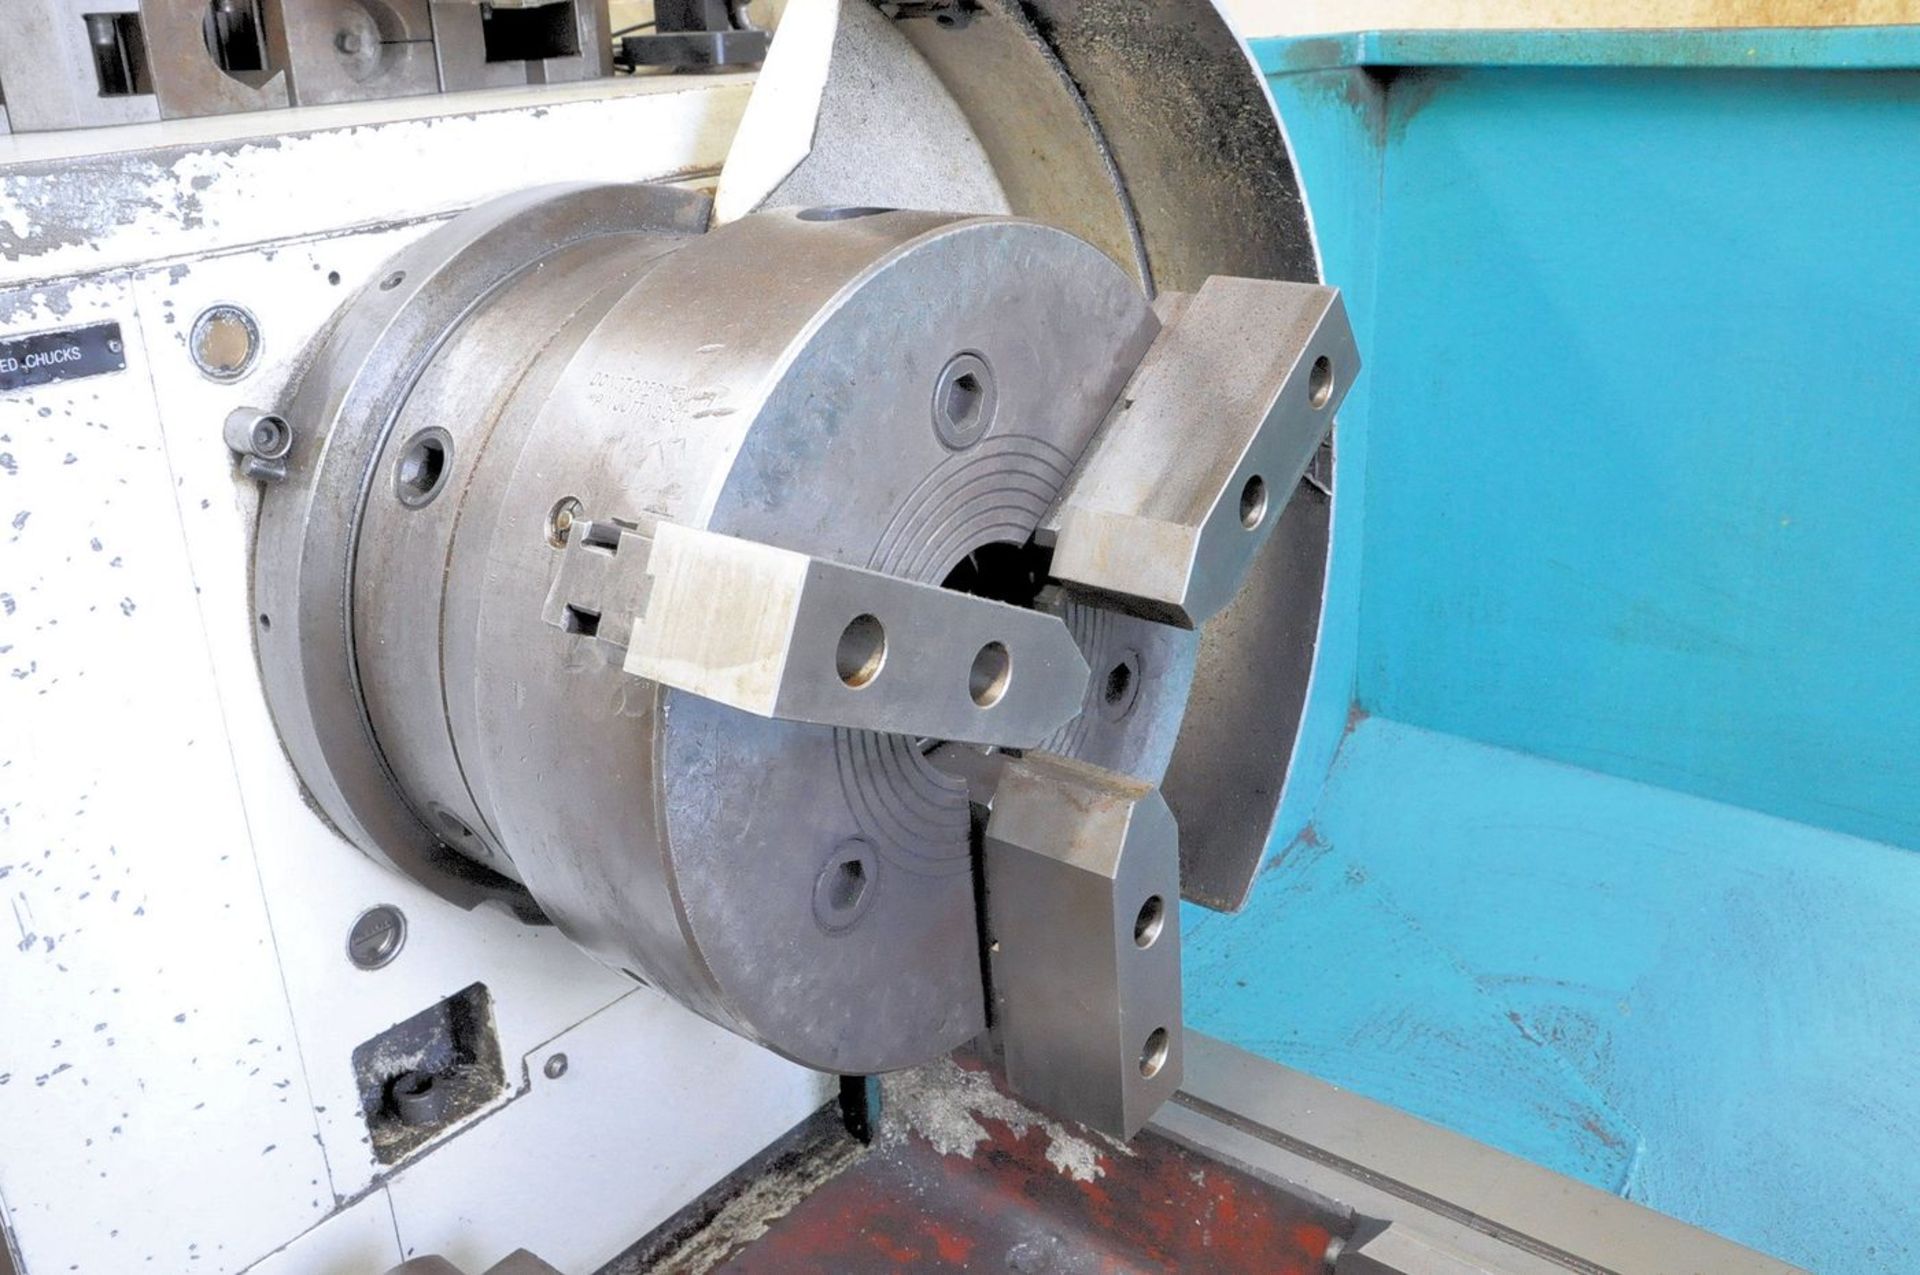 Clausing Colchester 22/28" X 90" Gap Bed Lathe, S/N MS0566-026D, 18-1,800 RPM, Threading, 4" Spindle - Image 4 of 8